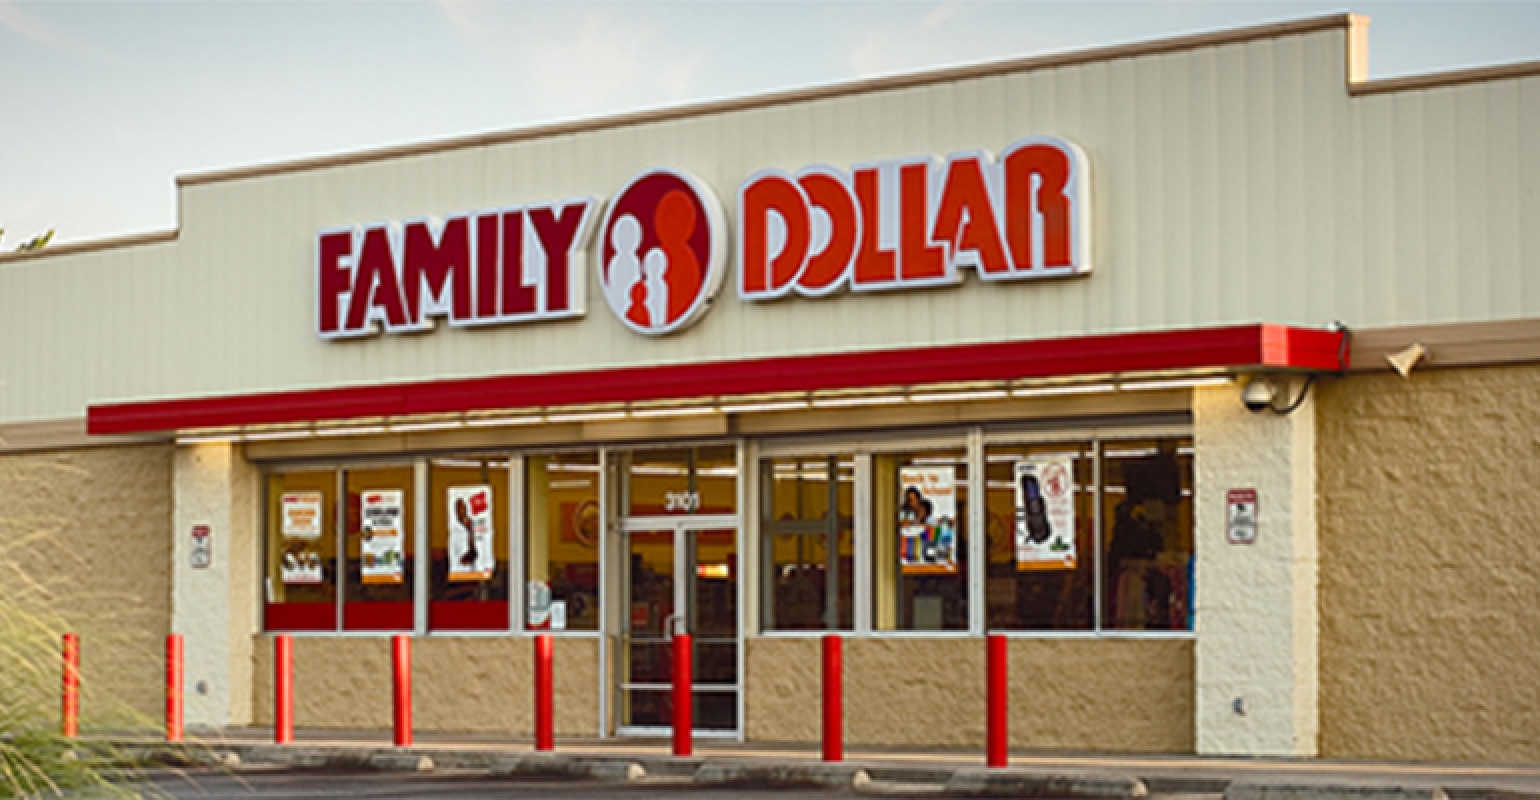 Dollar Tree to close up to 390 Family Dollar stores Supermarket News